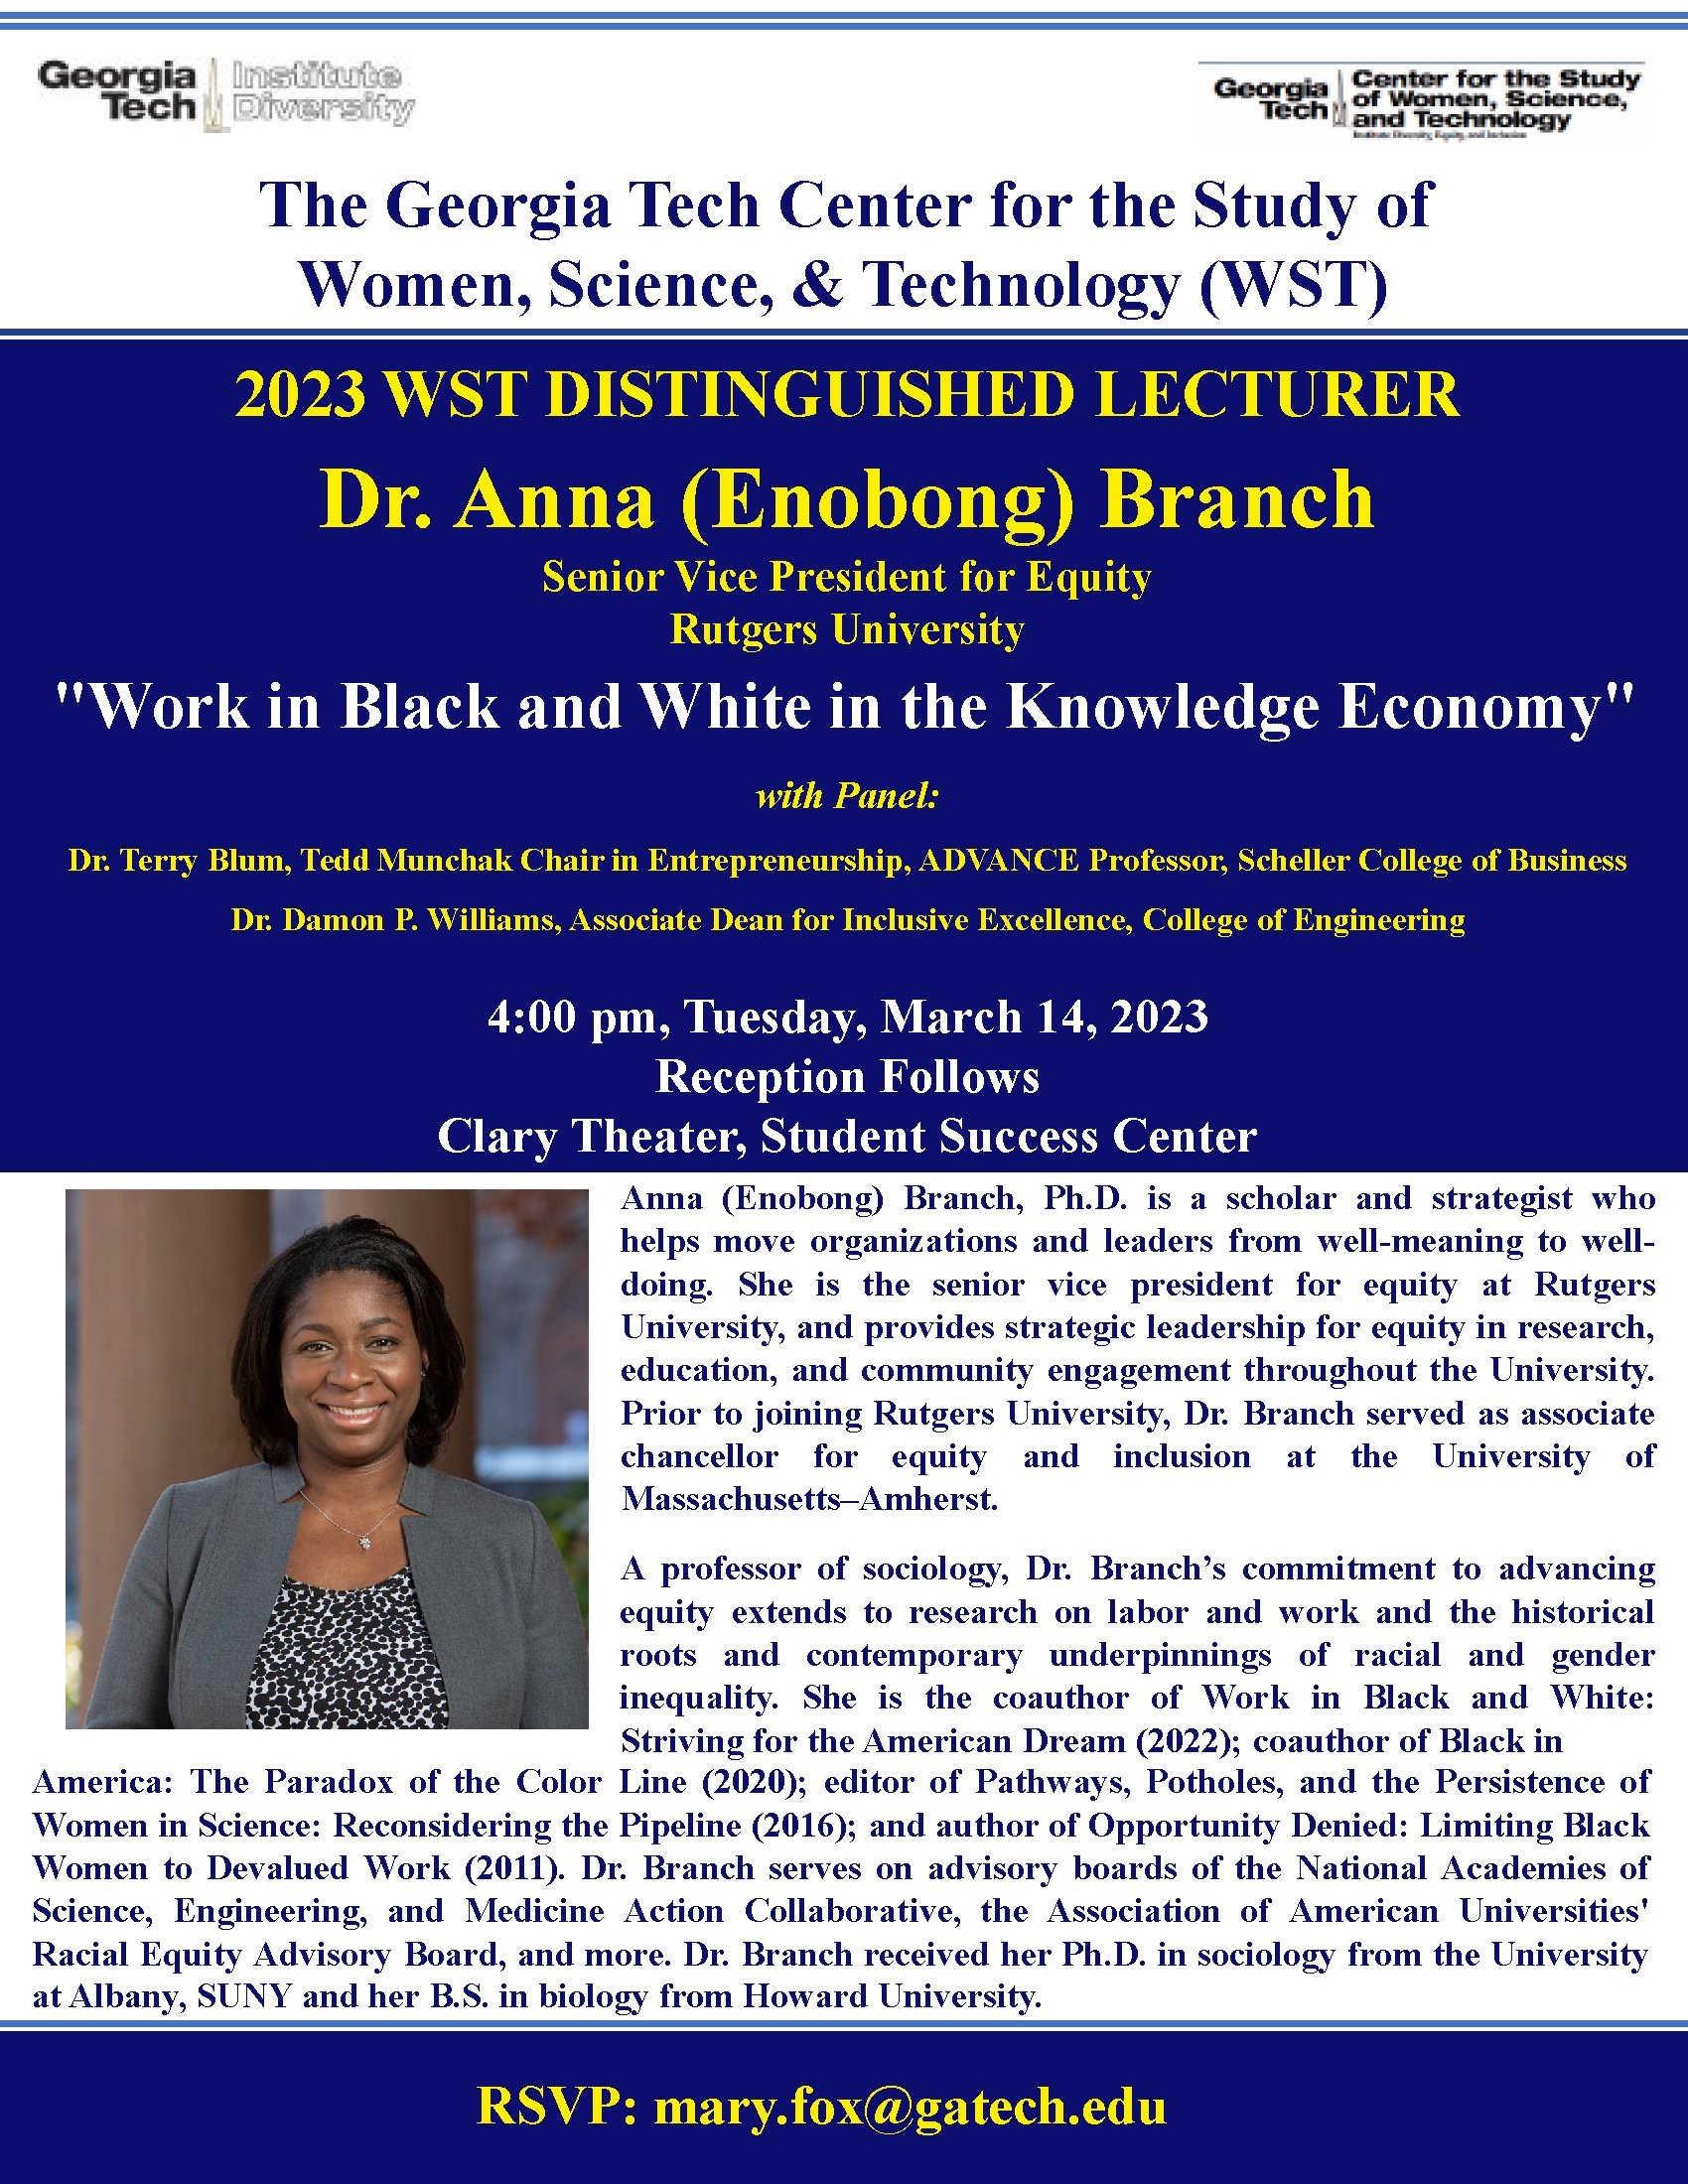 Dr. Anna Branch, President of Olin College of Engineering, will present on "Work in Black and White in the Knowledge Economy".